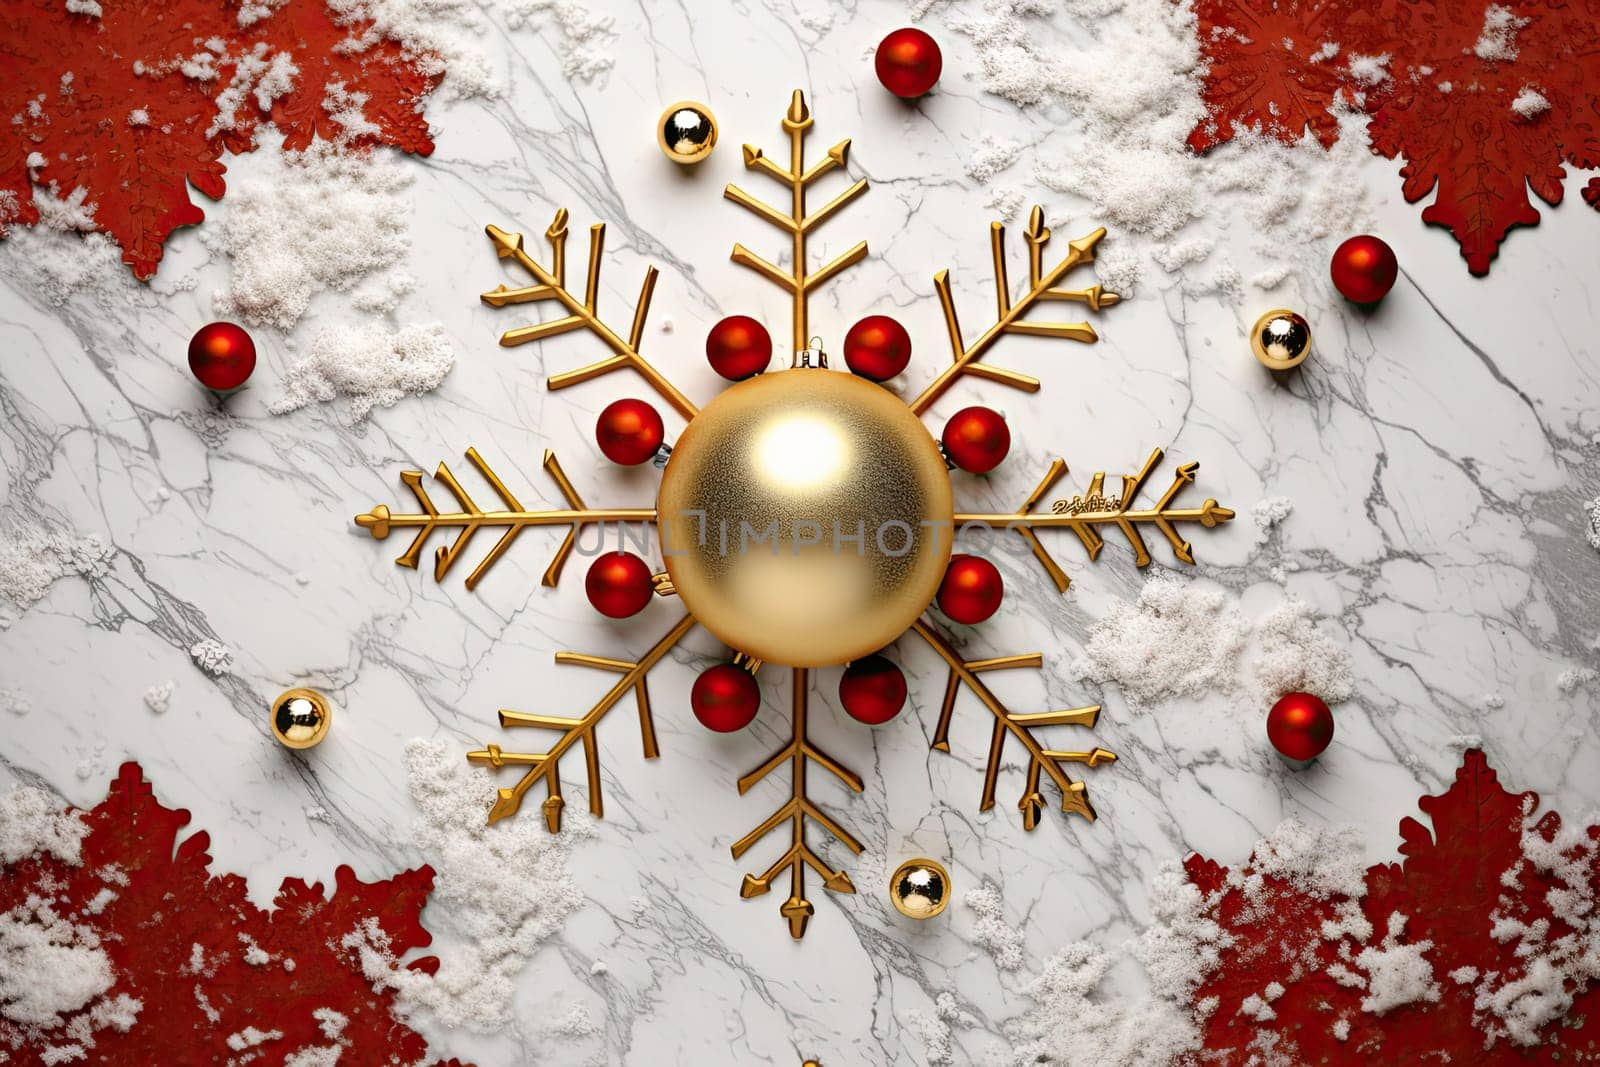 A Sparkling Golden Snowflake on a Serene White and Festive Red Background